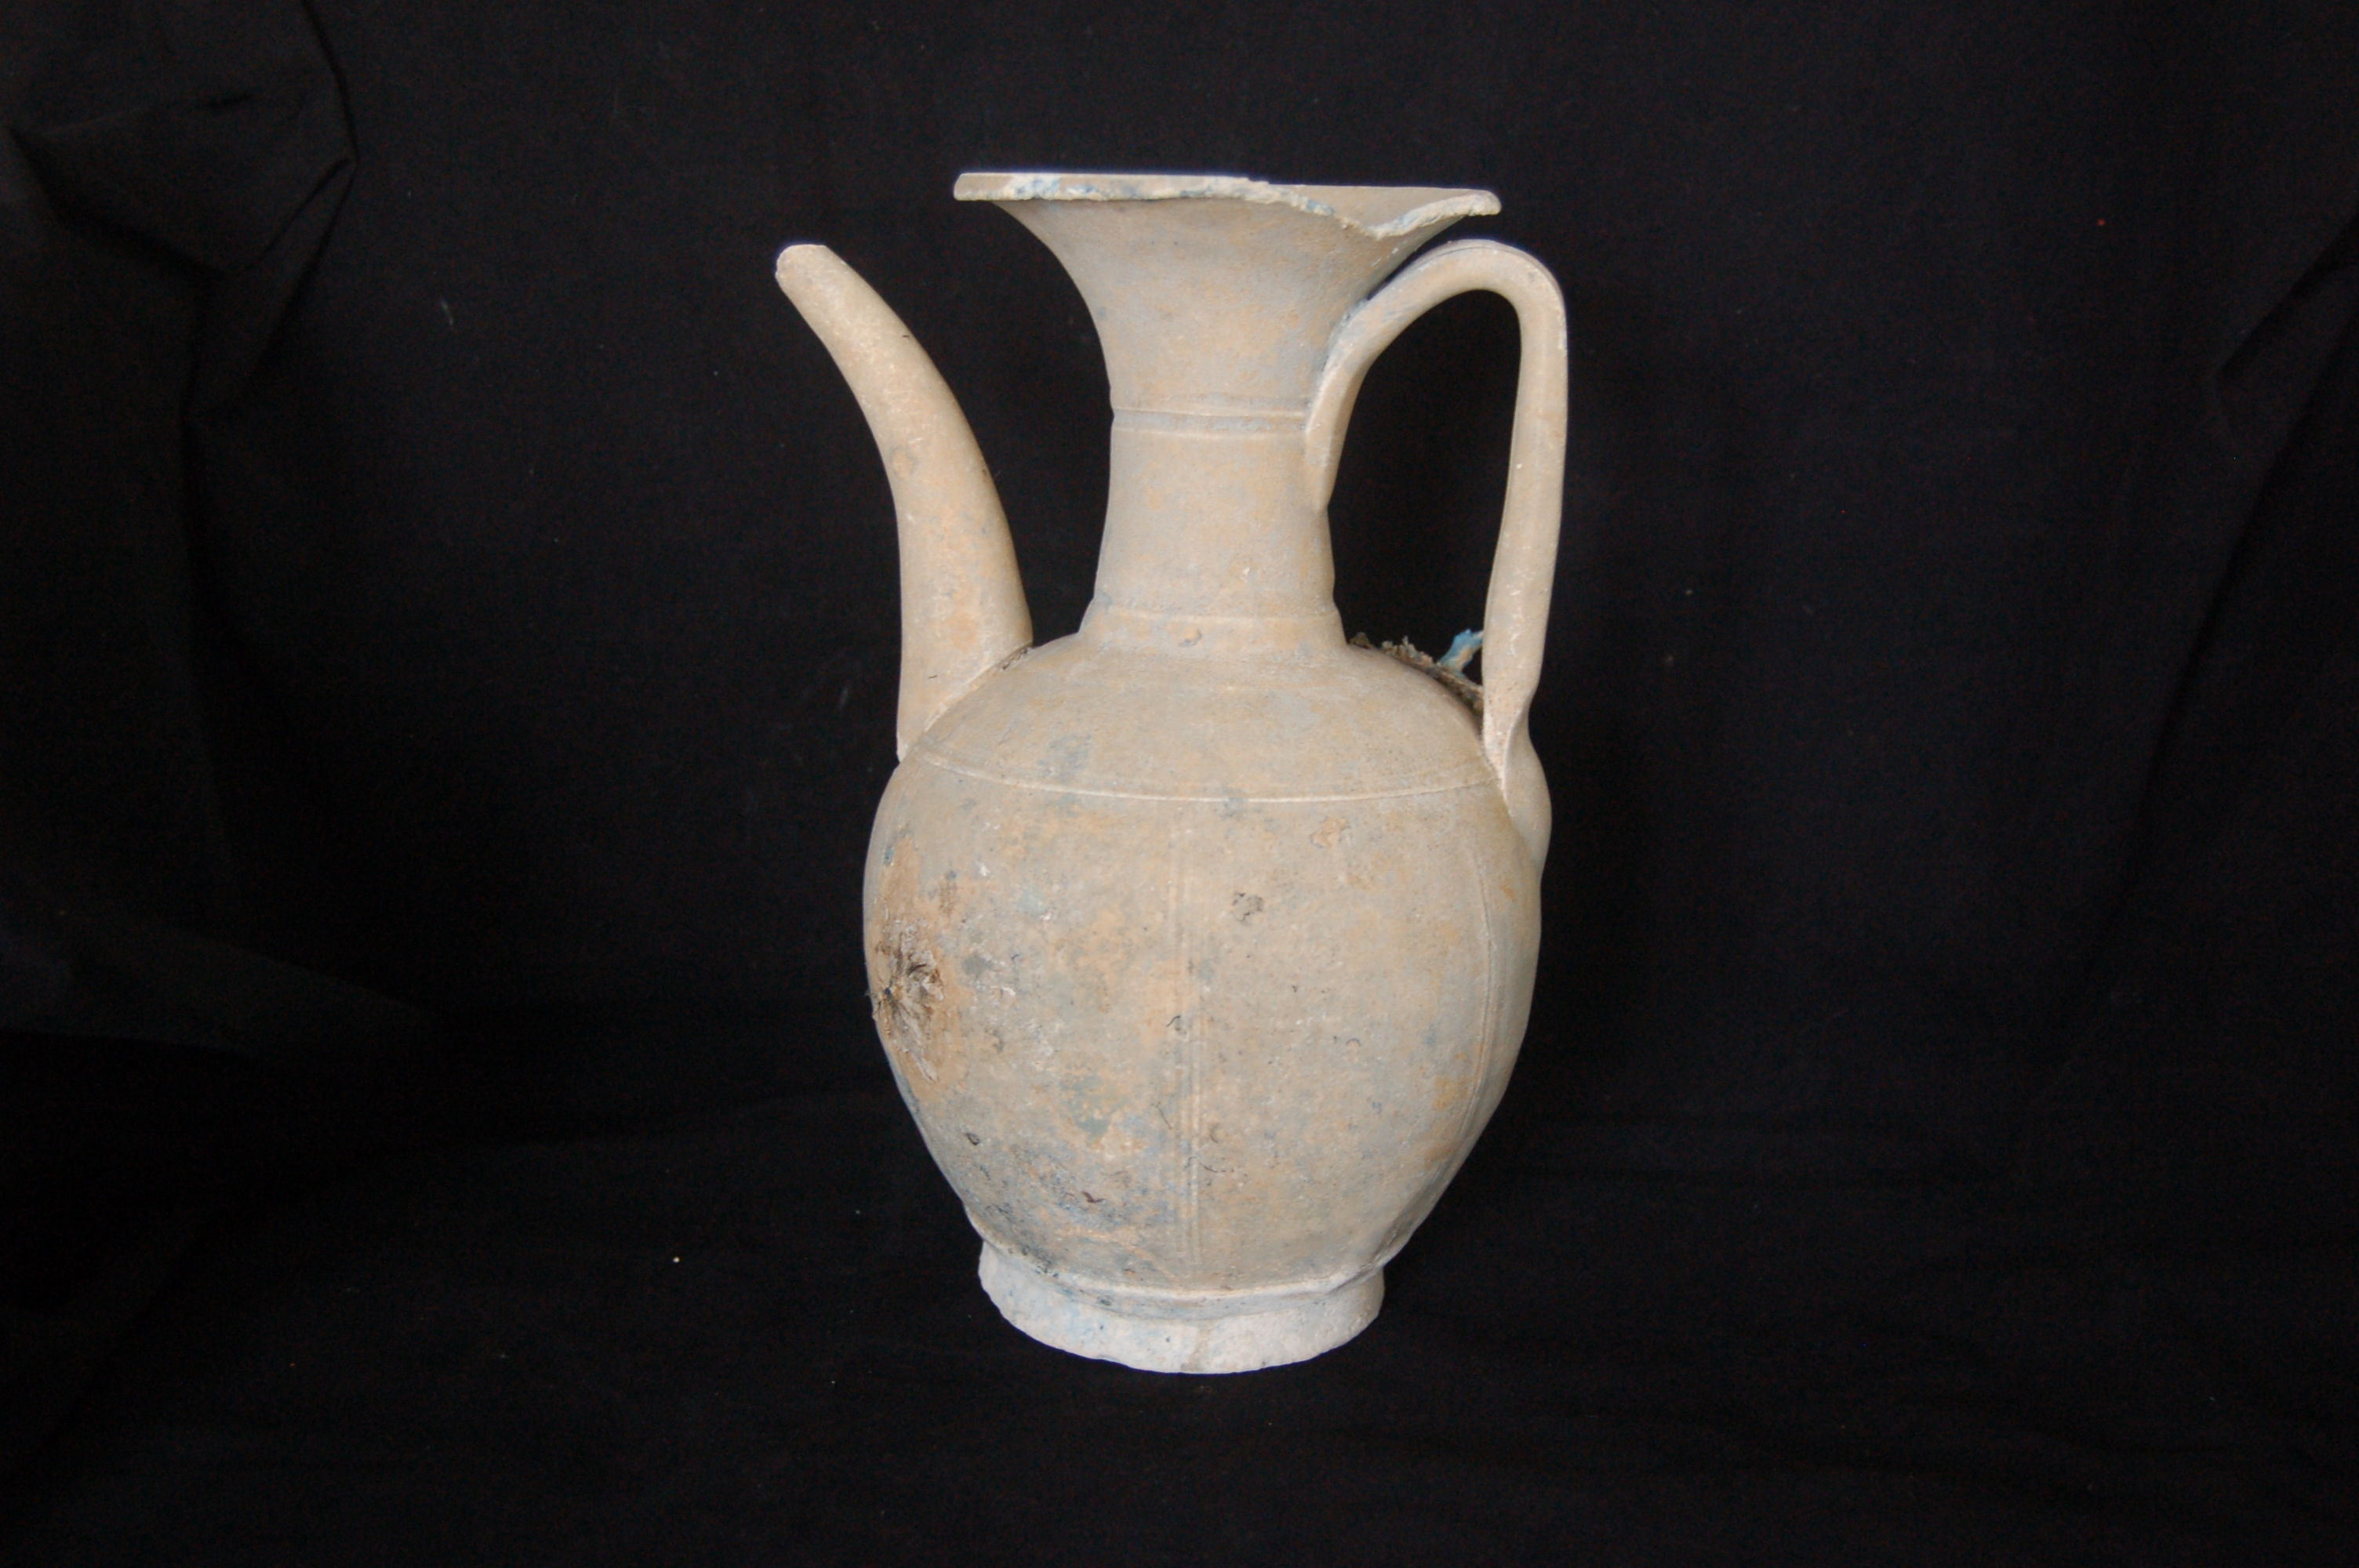 Ewer with a long neck, flared mouth, a strap handle and curved spout.  The carved foot-ring is slightly flared. Decorated with incised rings around the neck and shoulder, and vertical triplets around the body. Diameter 14 cm, height 23.5 cm.